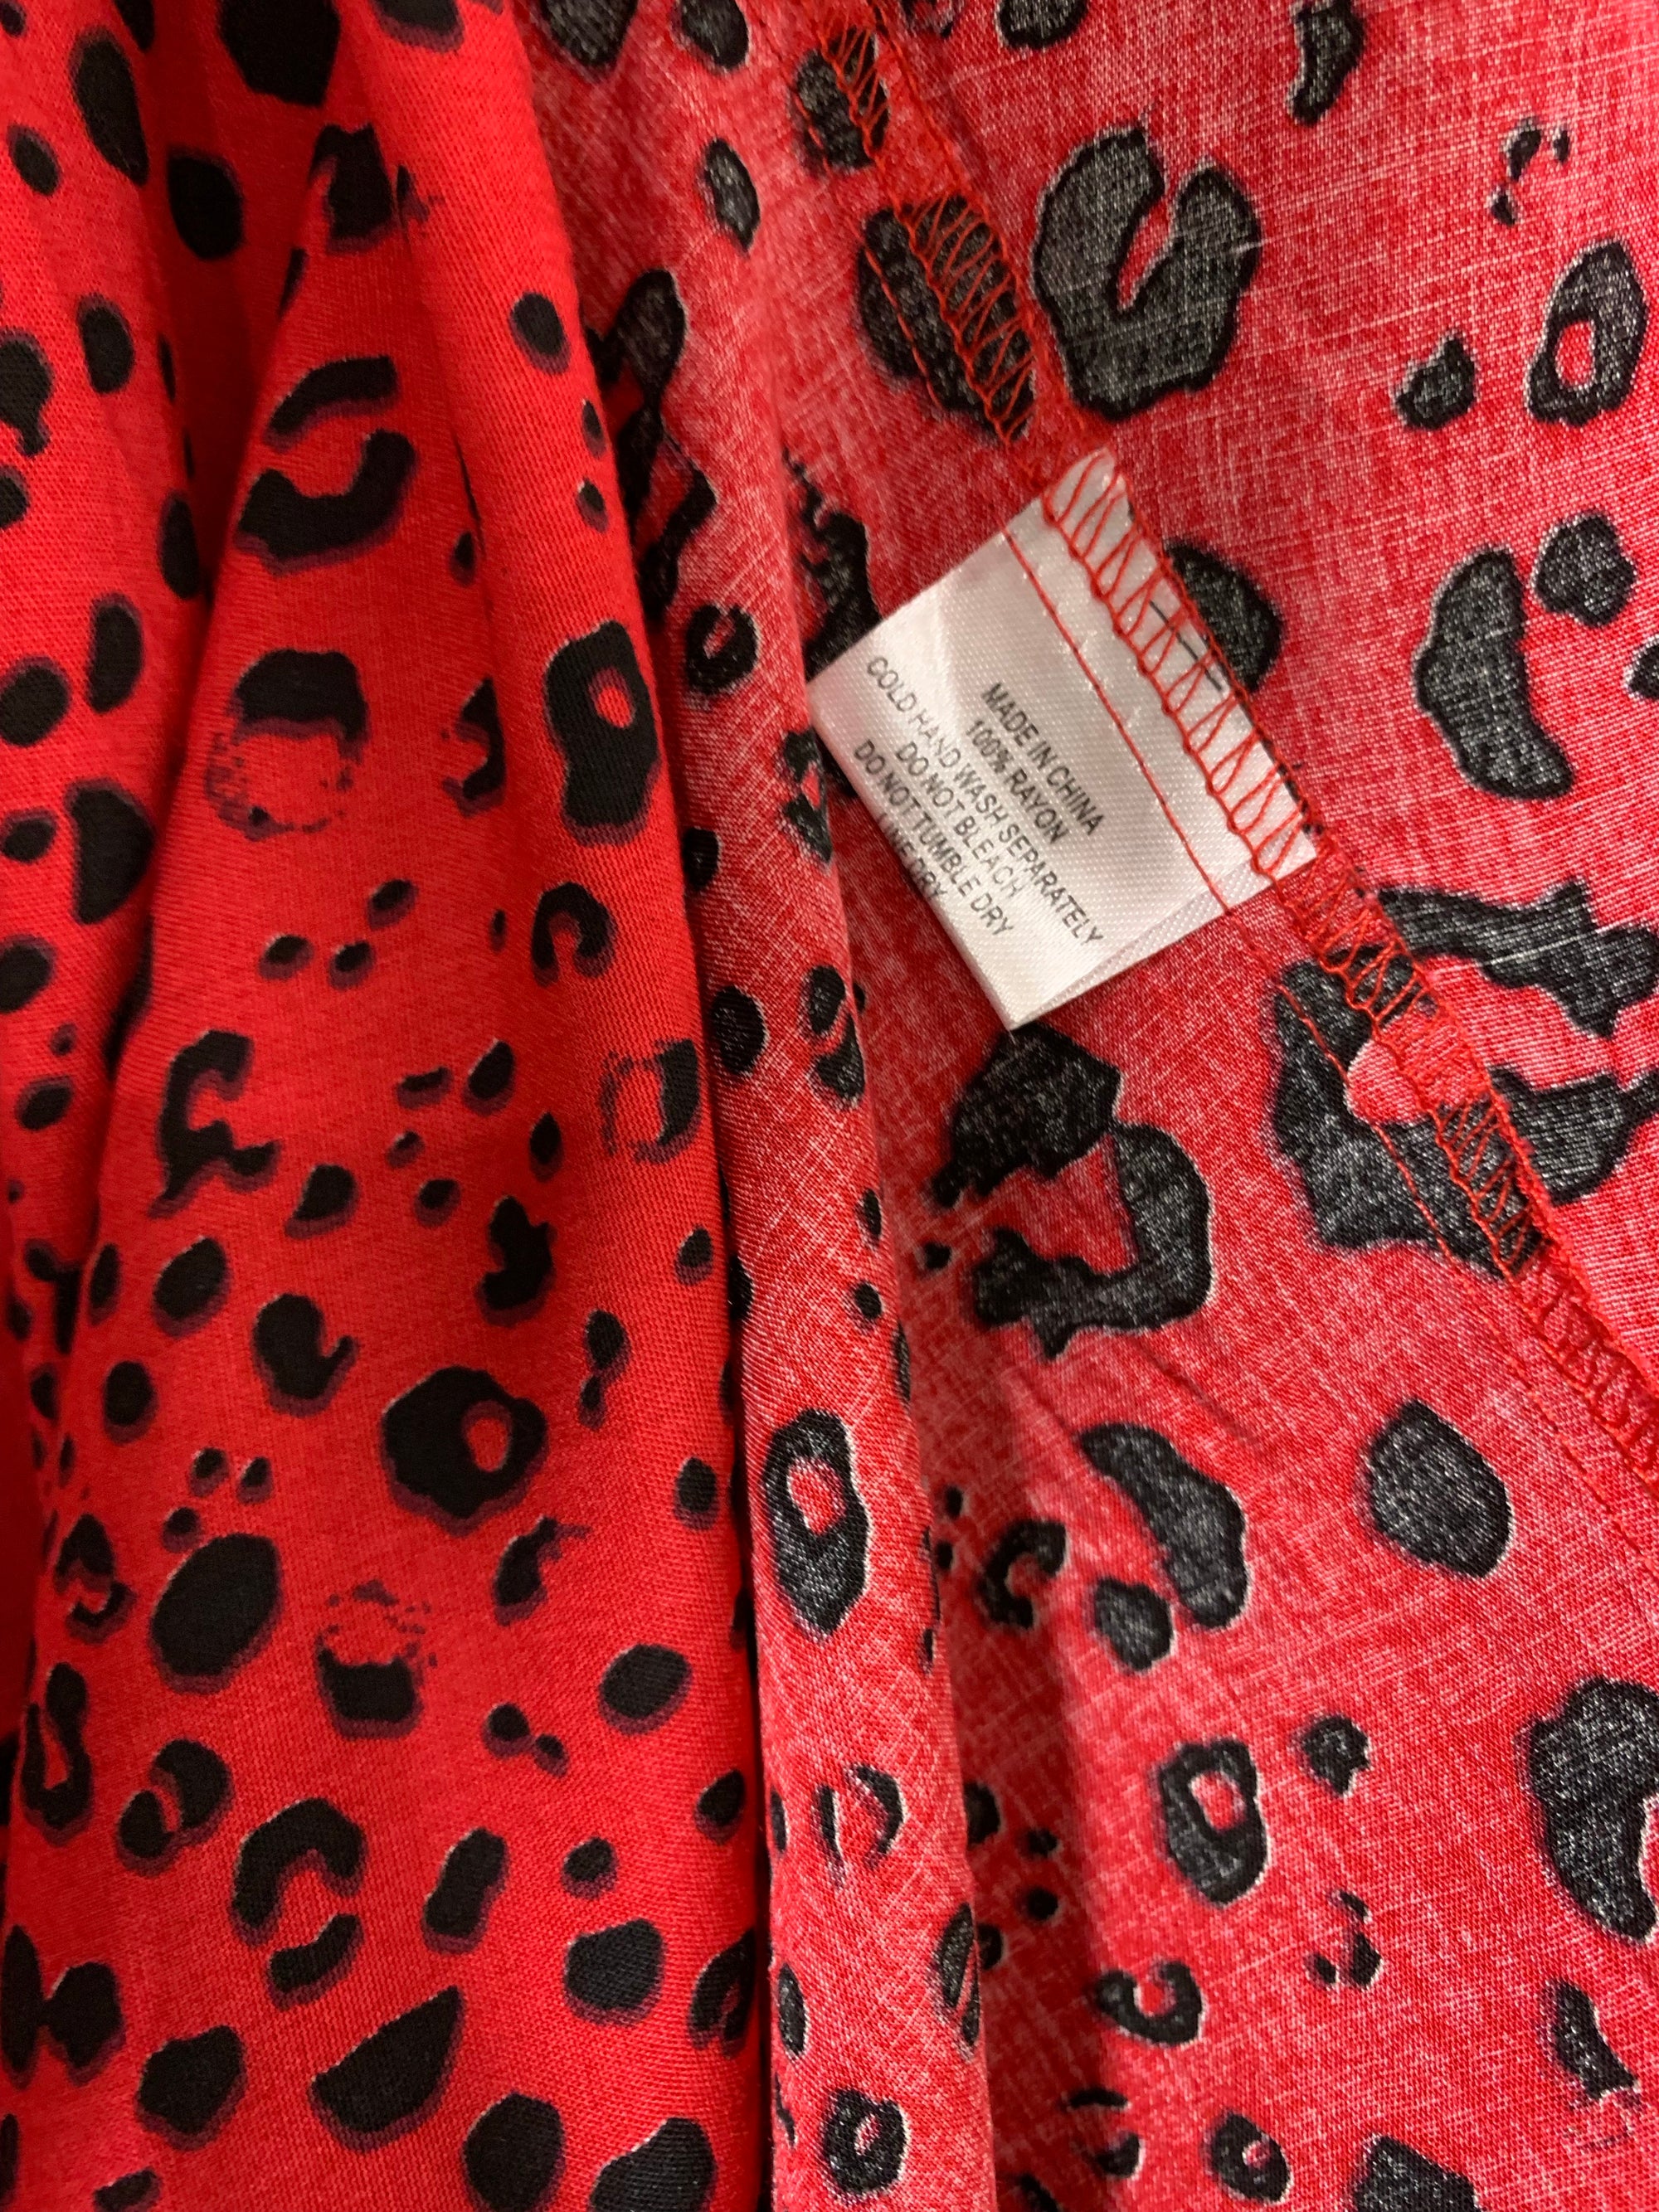 Fit & Flare Dress in Red & Black Leopard Print RollUp Sleeves - Willow Tree